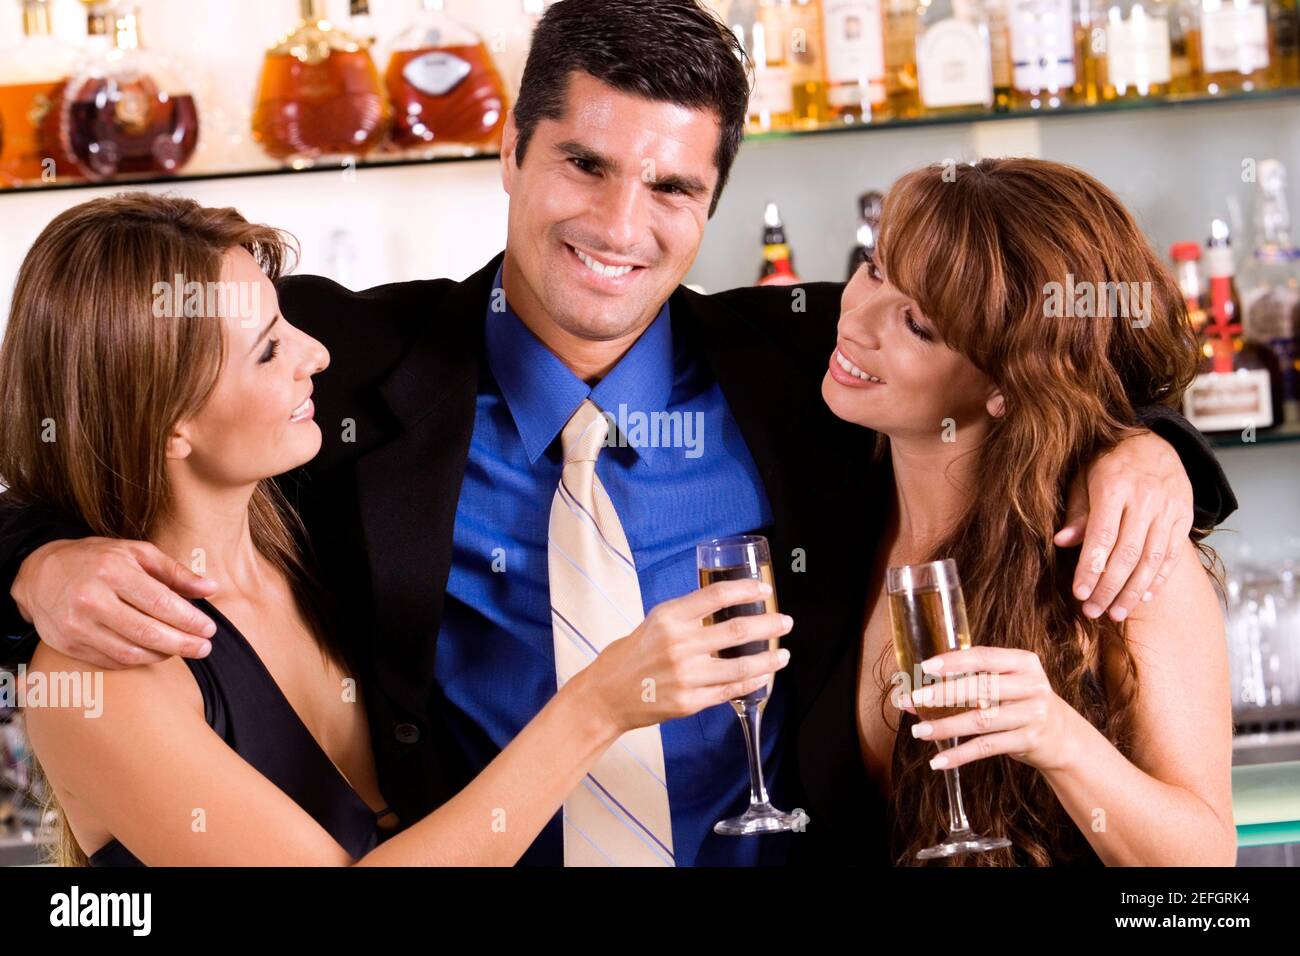 Portrait of a businessman with his arms around a young woman and a mid adult woman Stock Photo